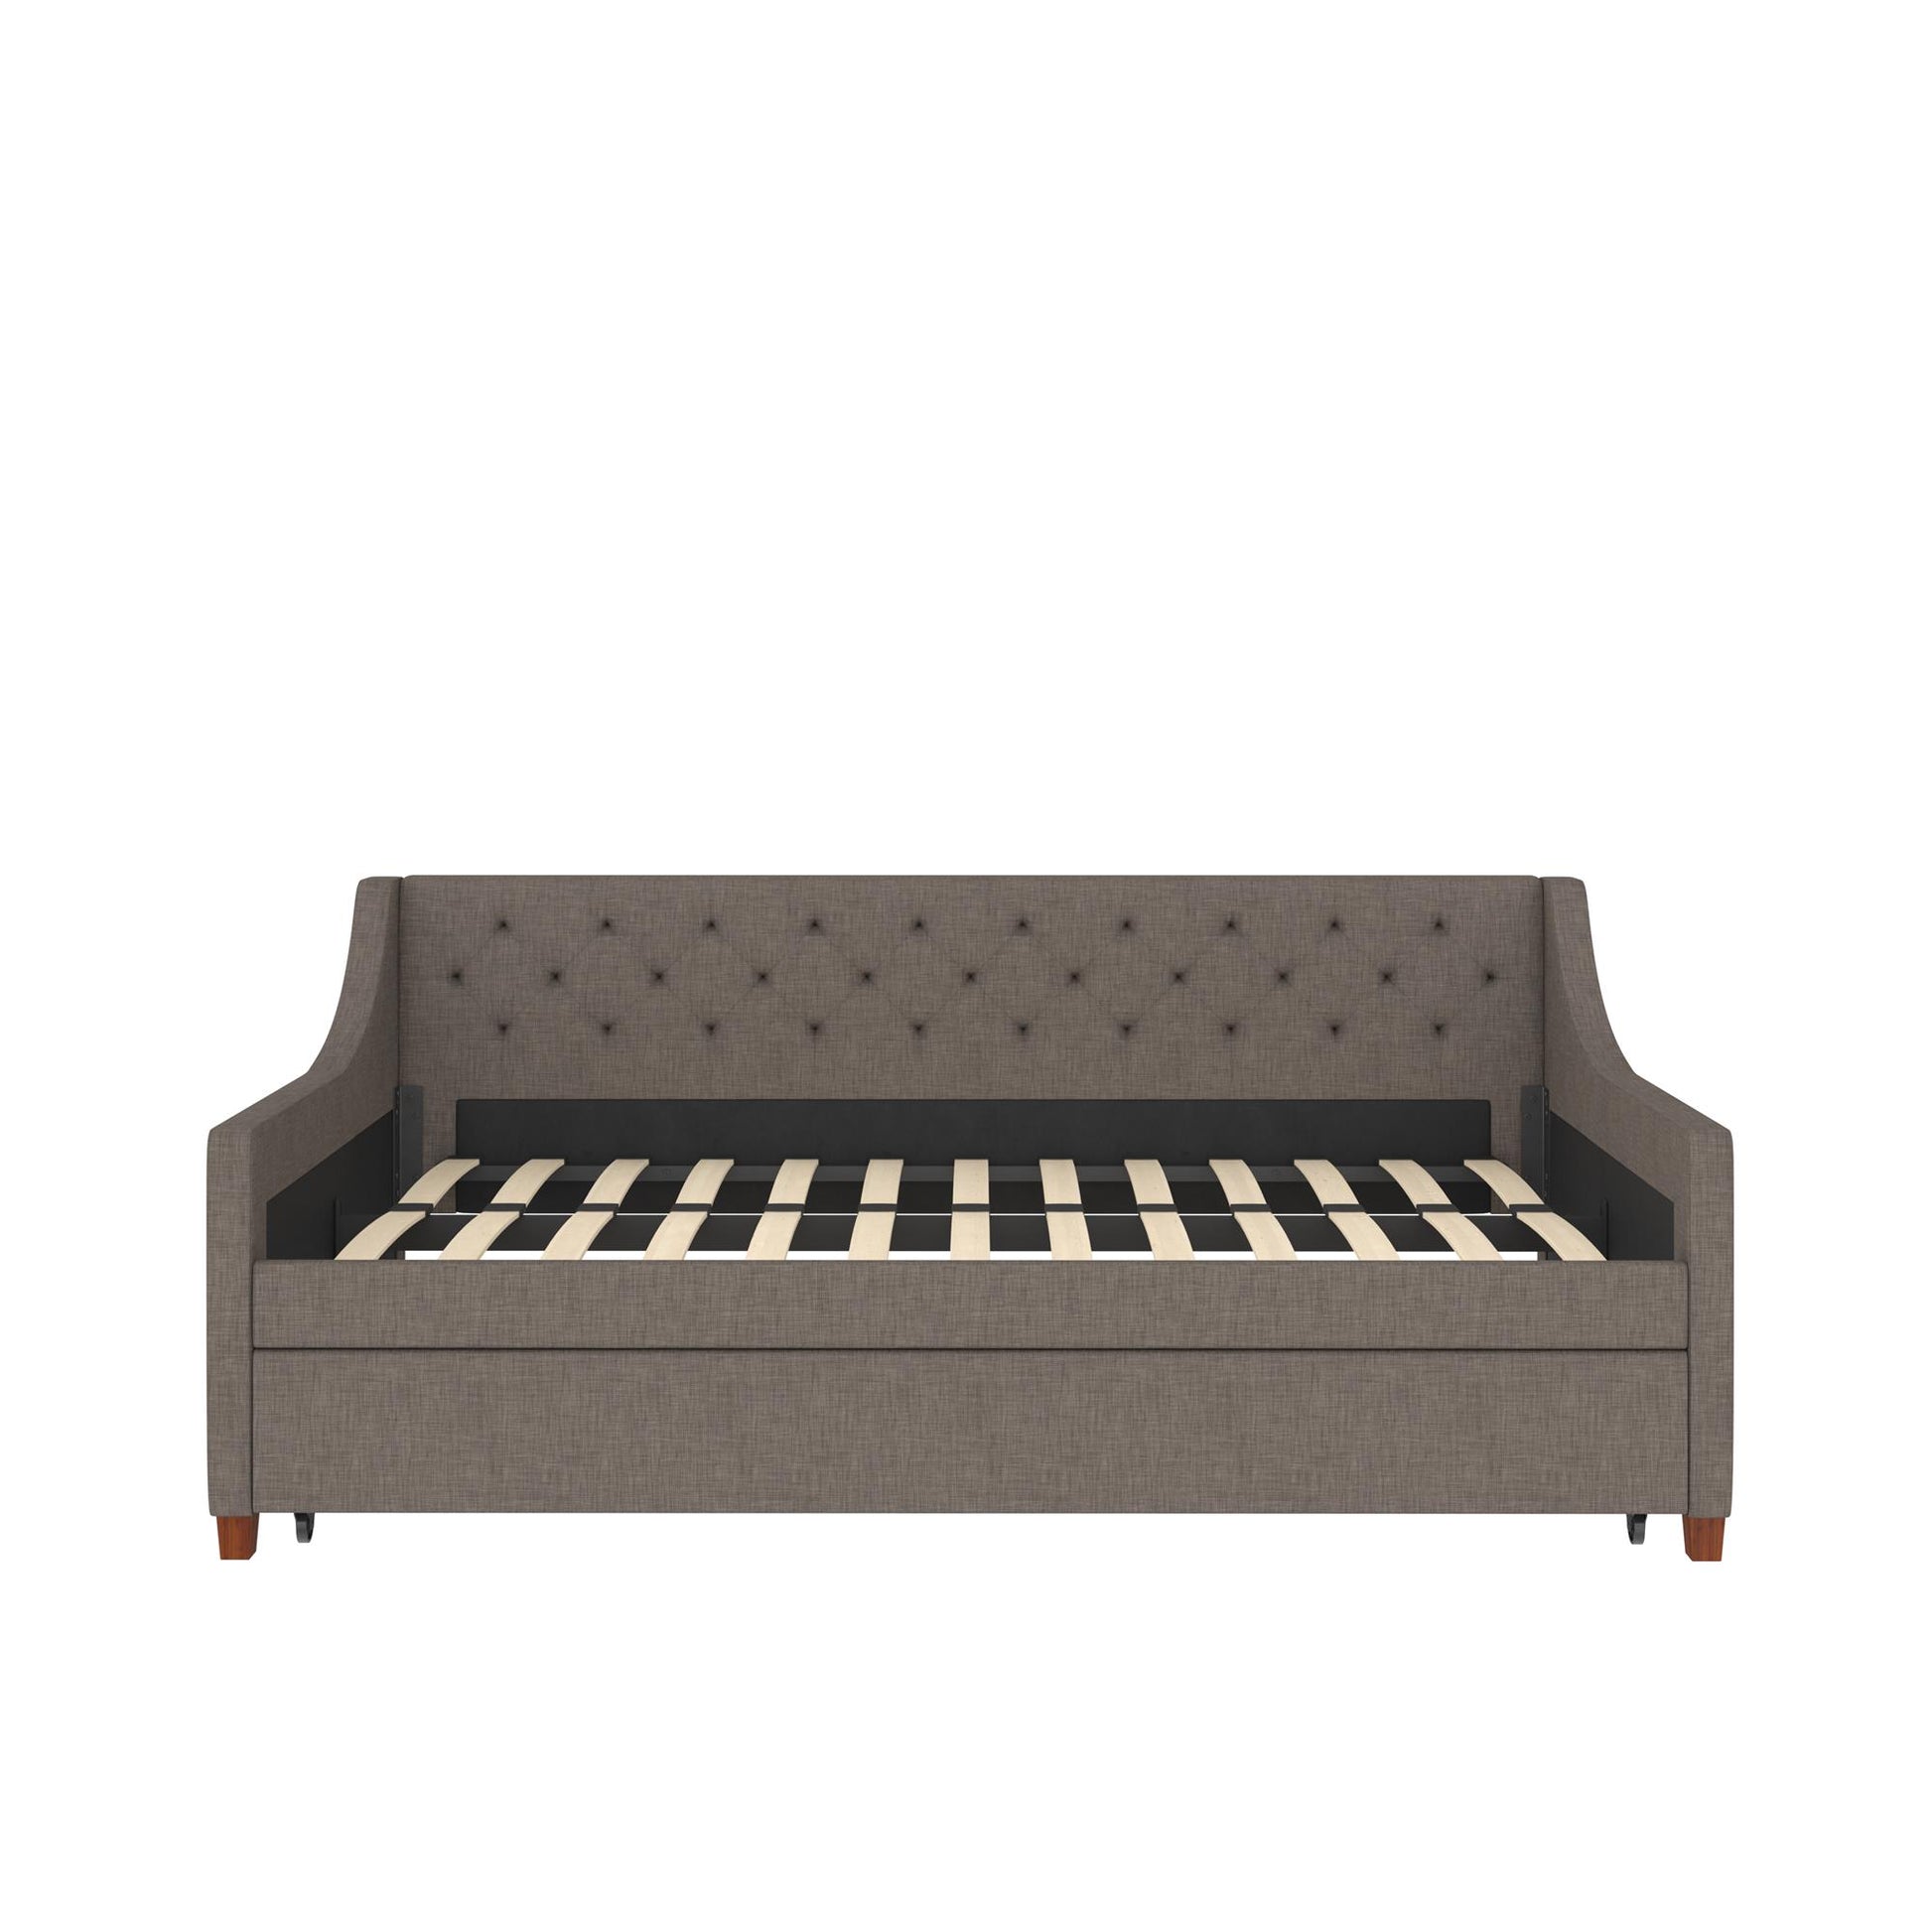 Her Majesty Daybed and Trundle - Grey Linen - Twin